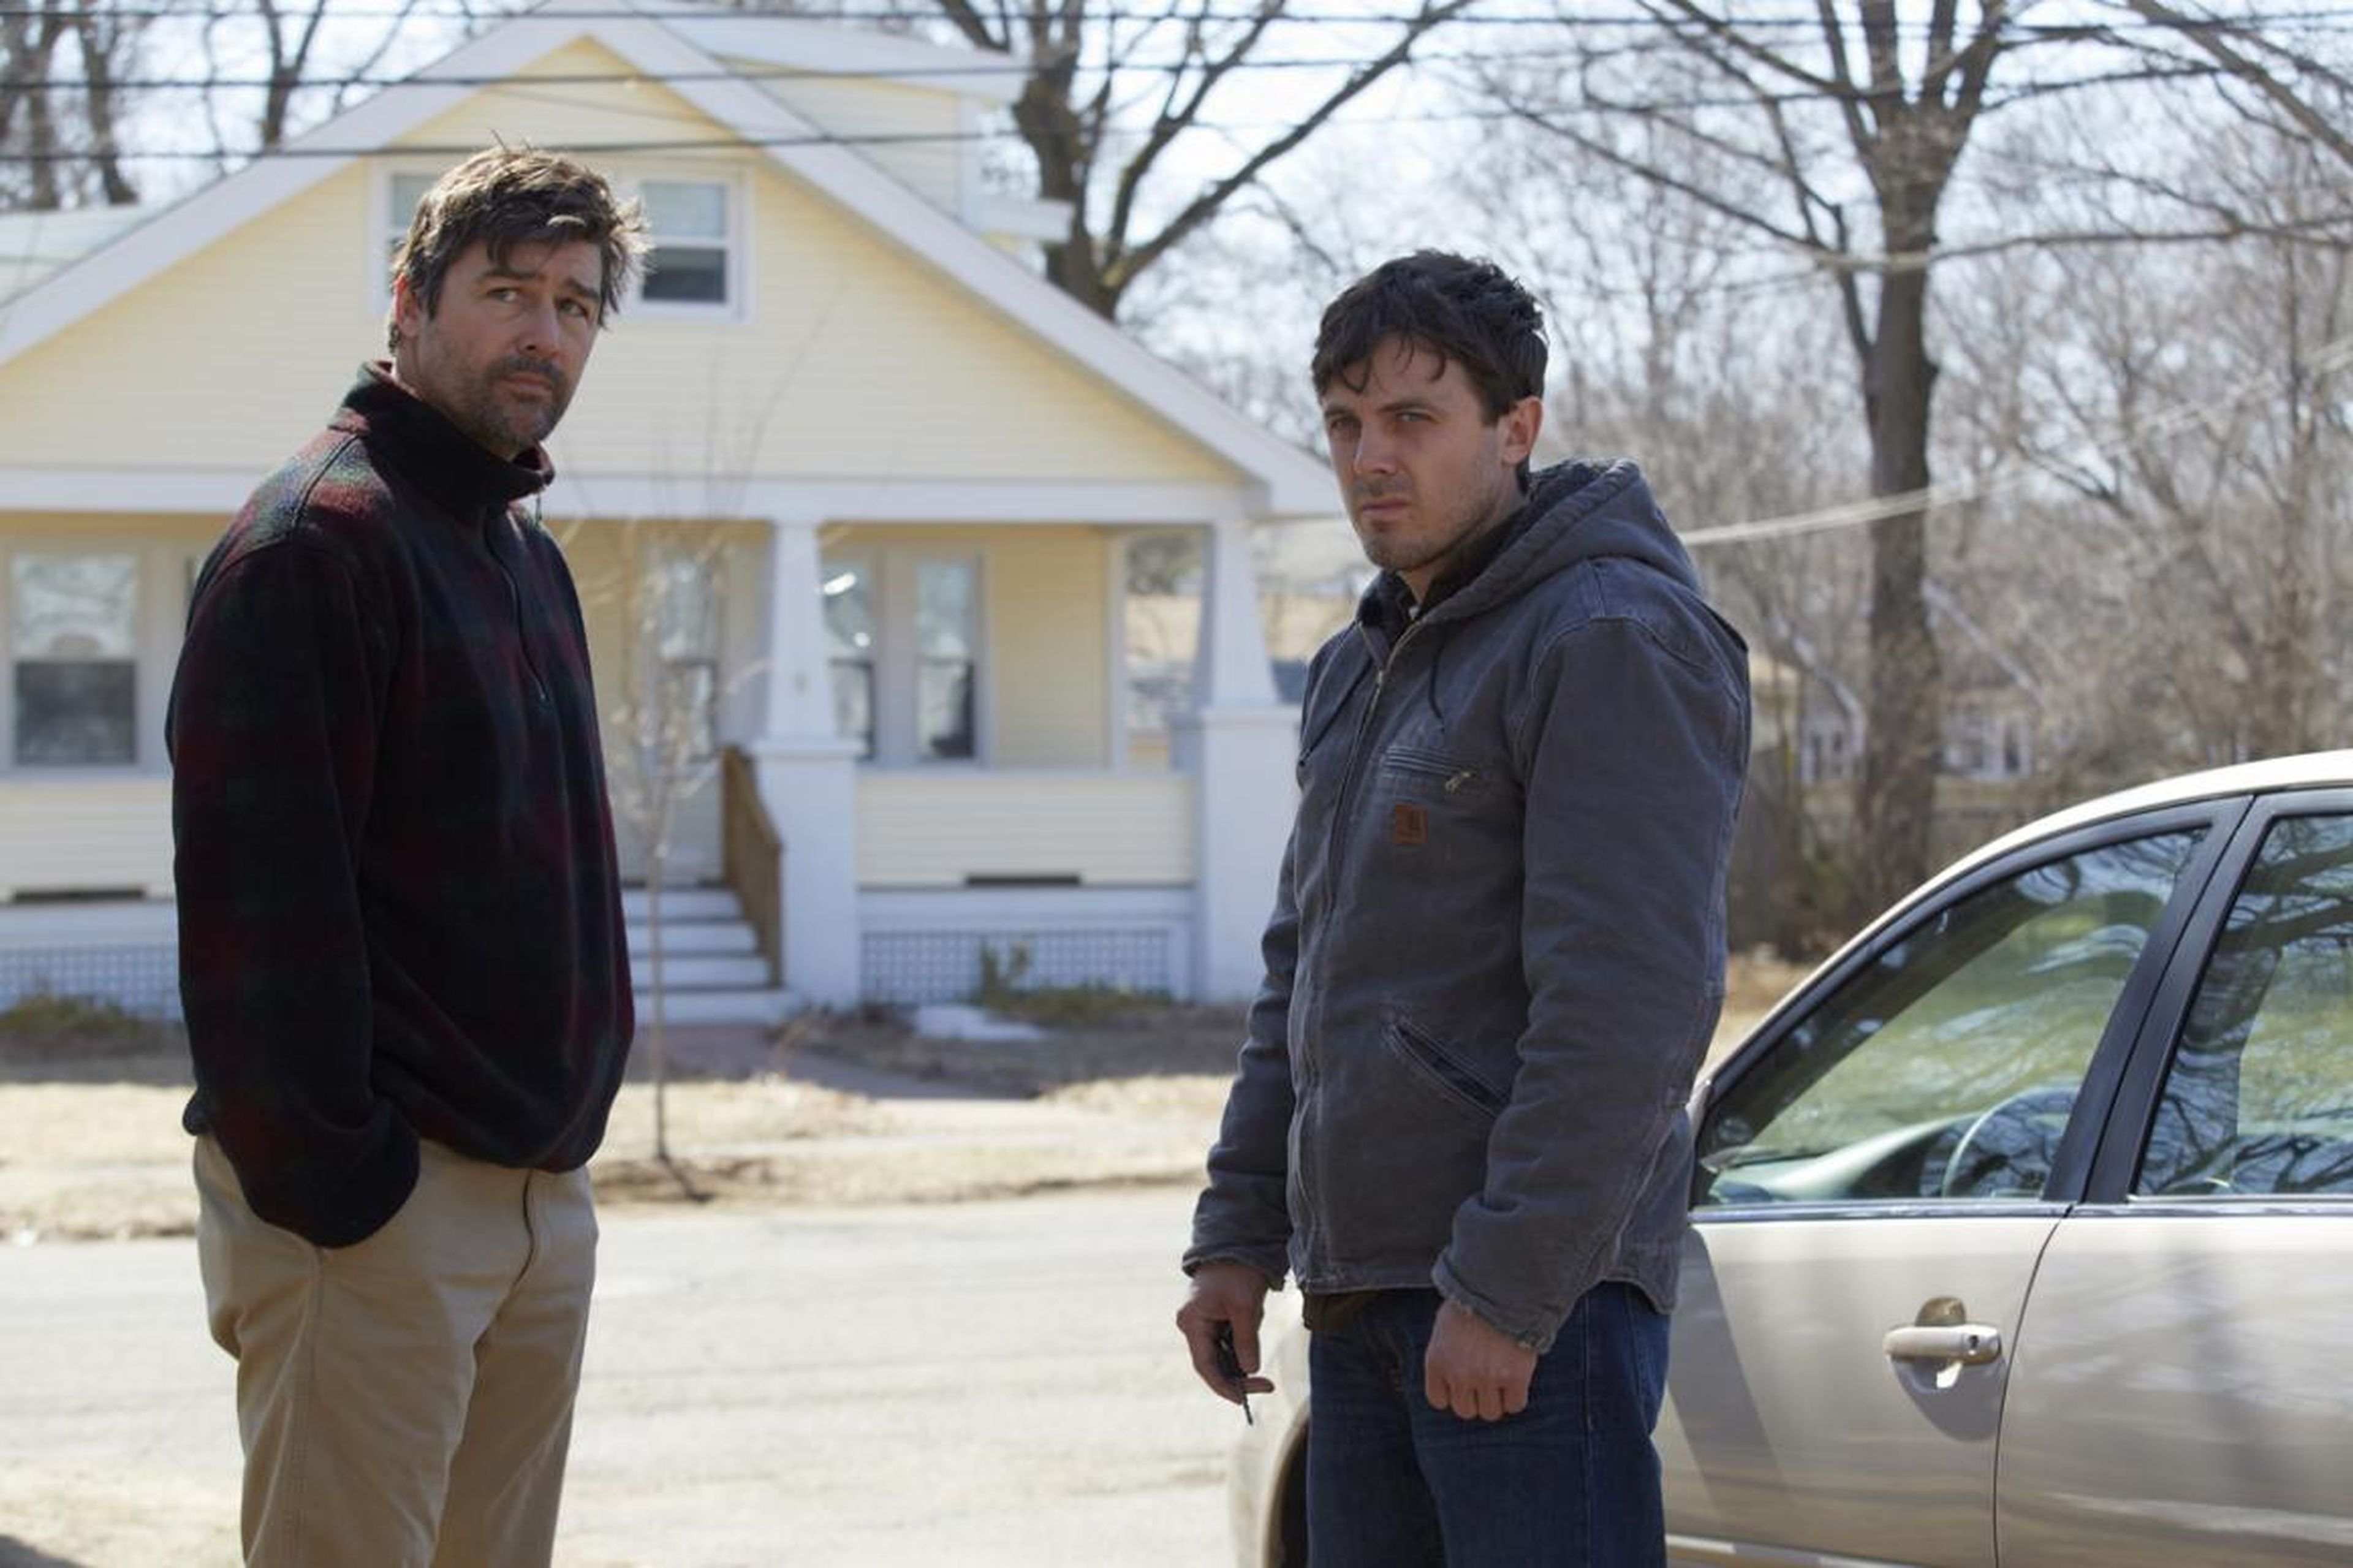 23. "Manchester by the Sea" (2016)